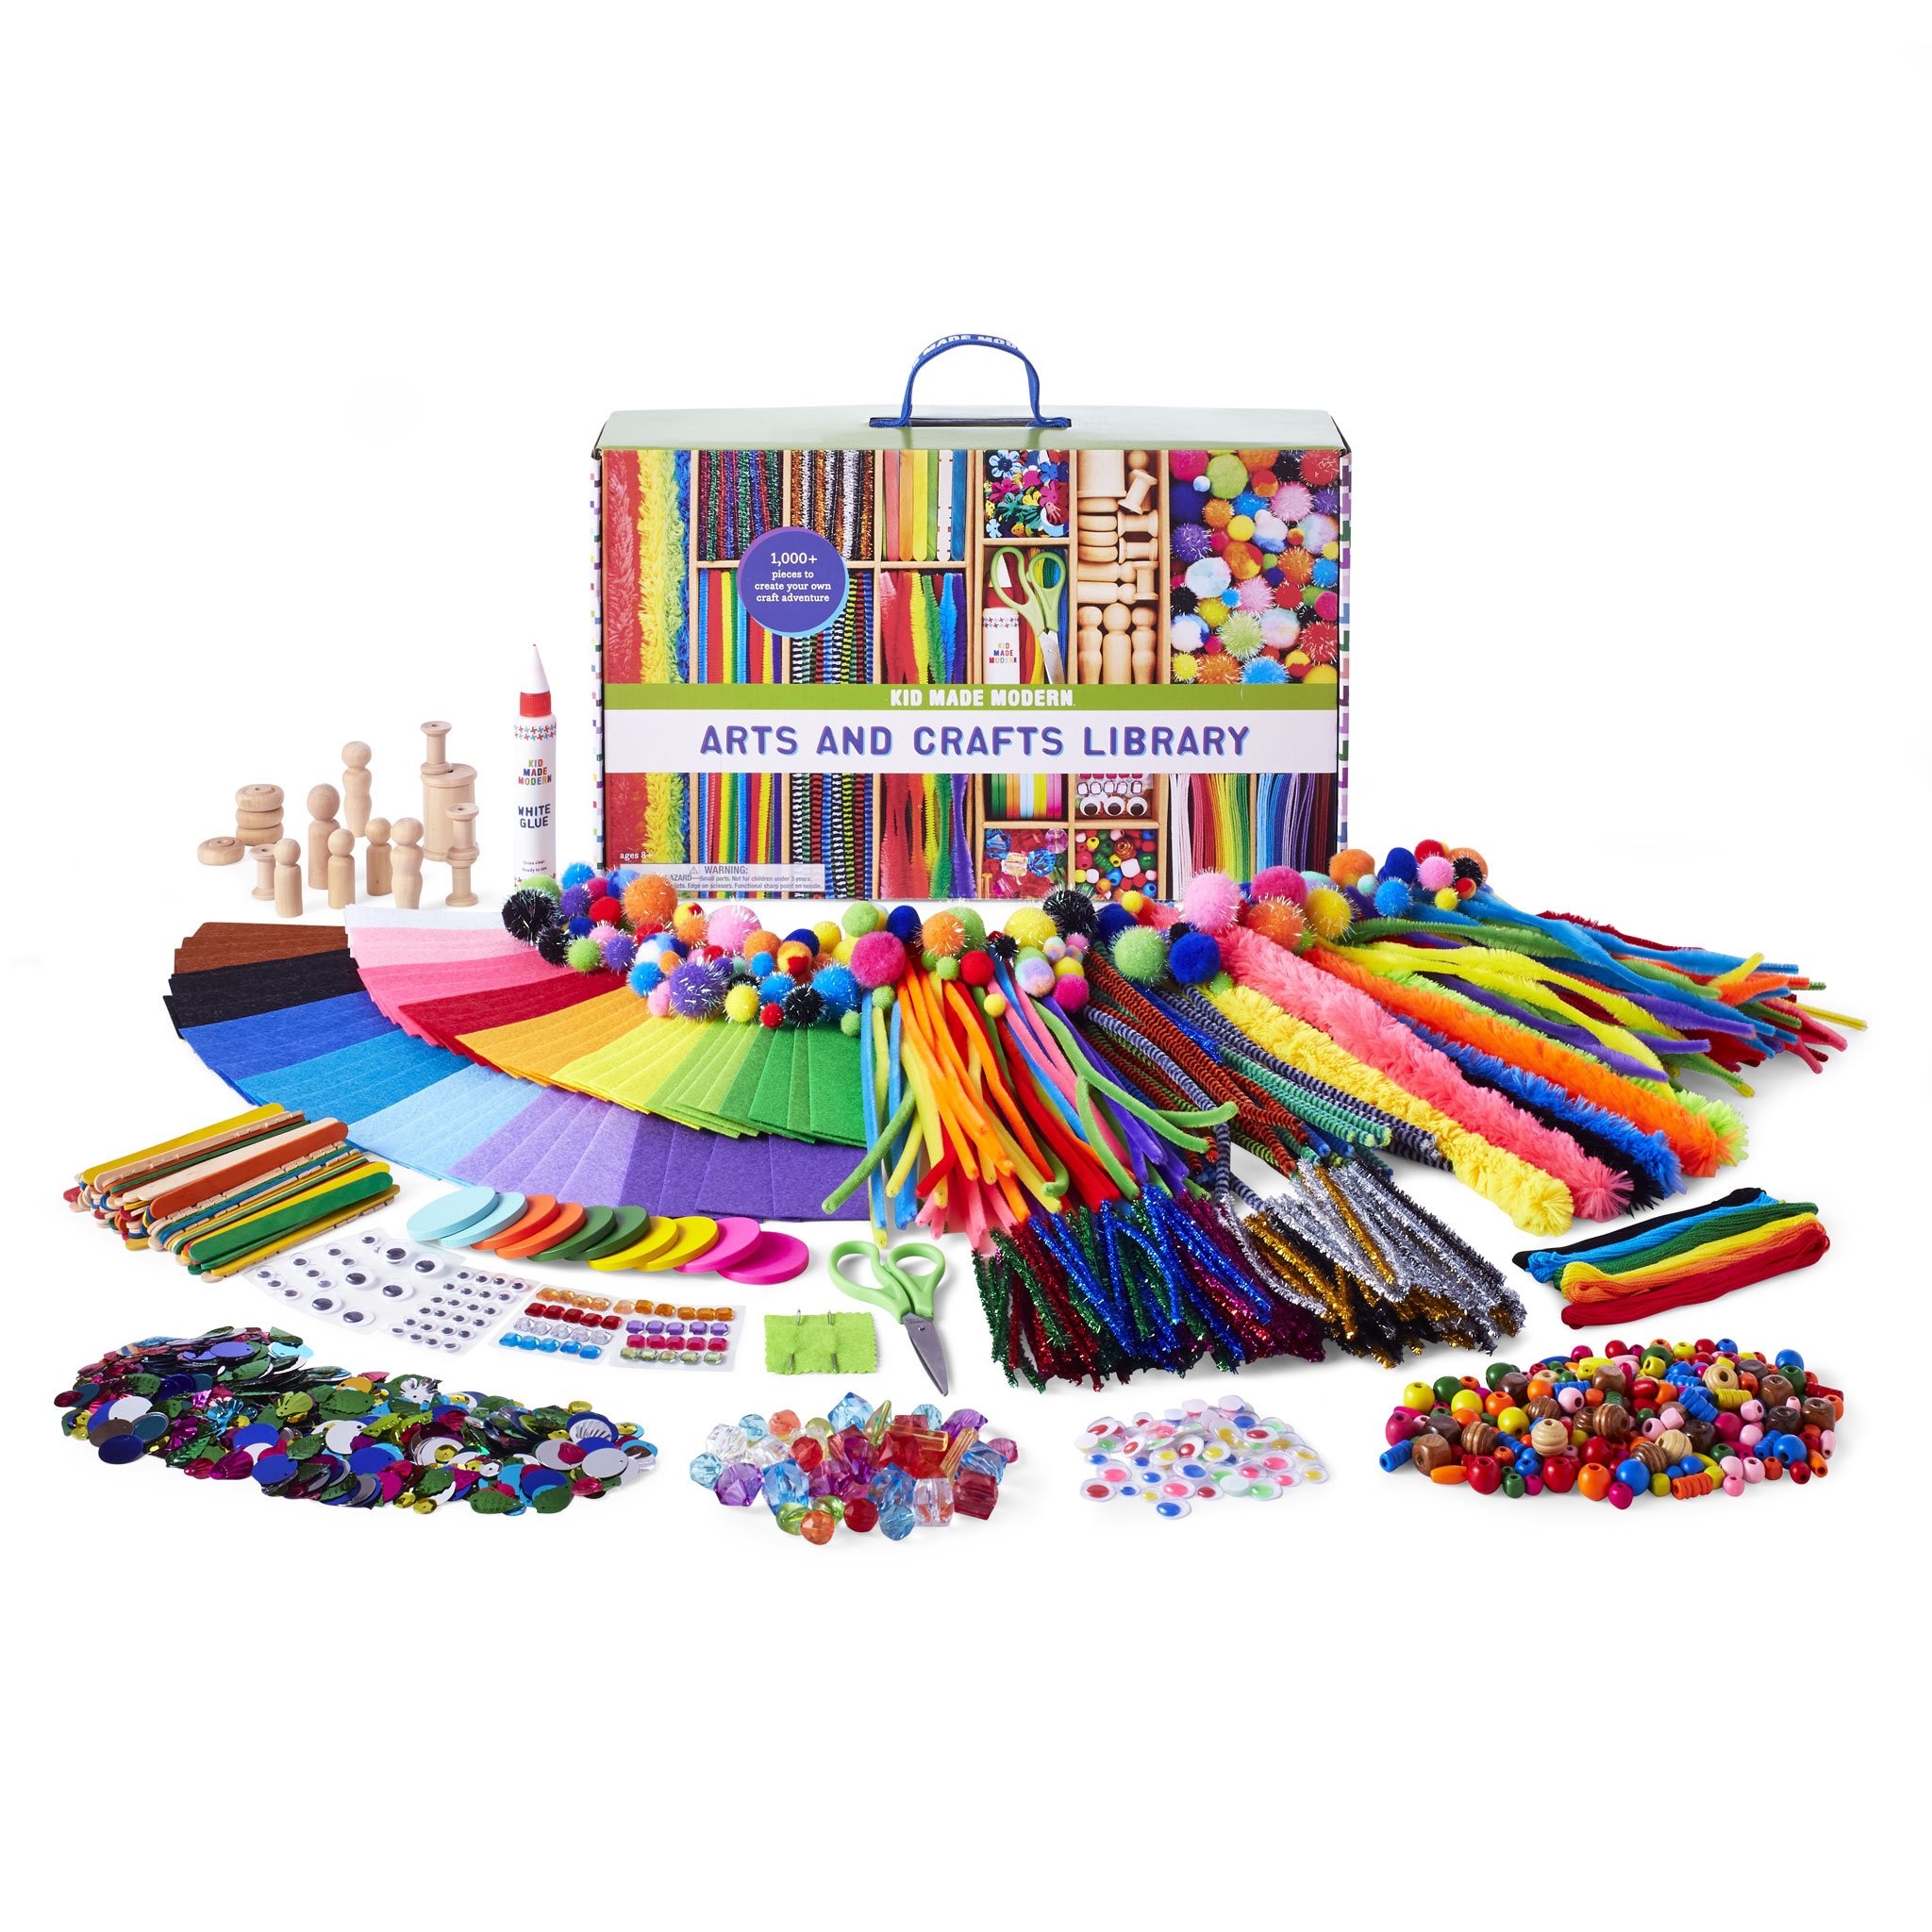 Kid Made Modern Arts and Crafts Library - Craft Set for Kids Ages 6 and Up - image 1 of 5